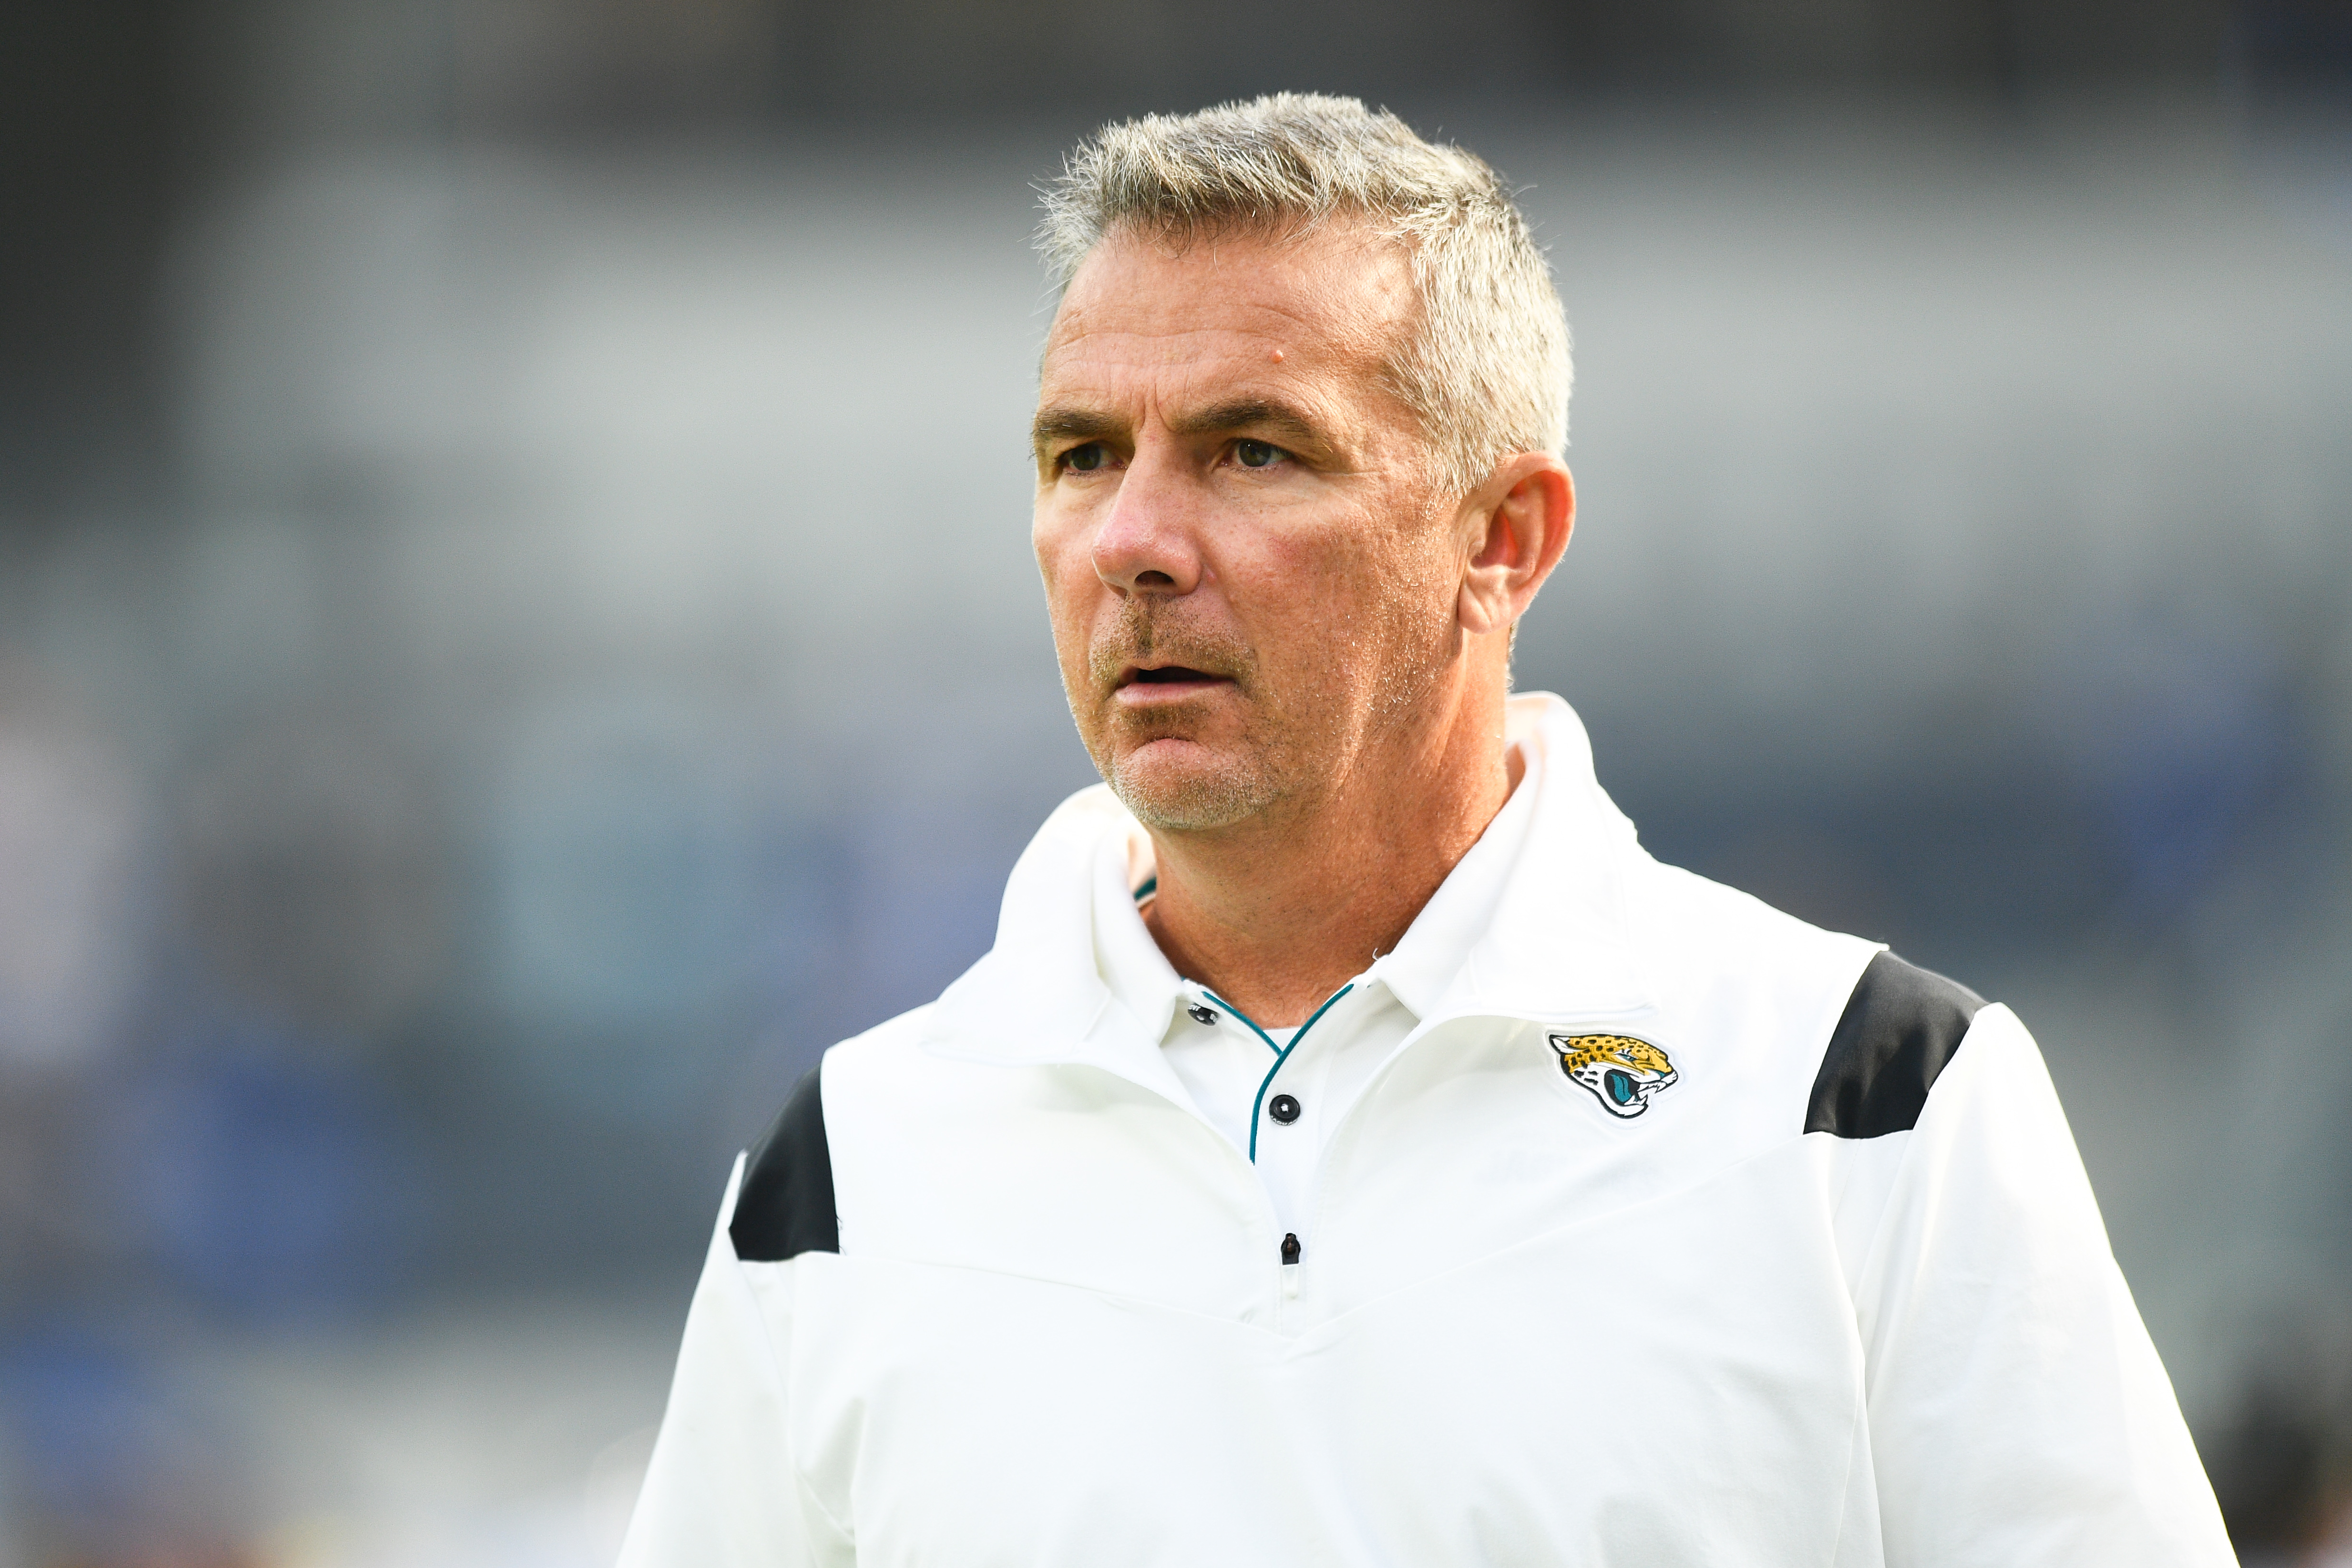 Jaguars Owner Shad Khan on Urban Meyer: 'I Want to Do the Right Thing for the Team'